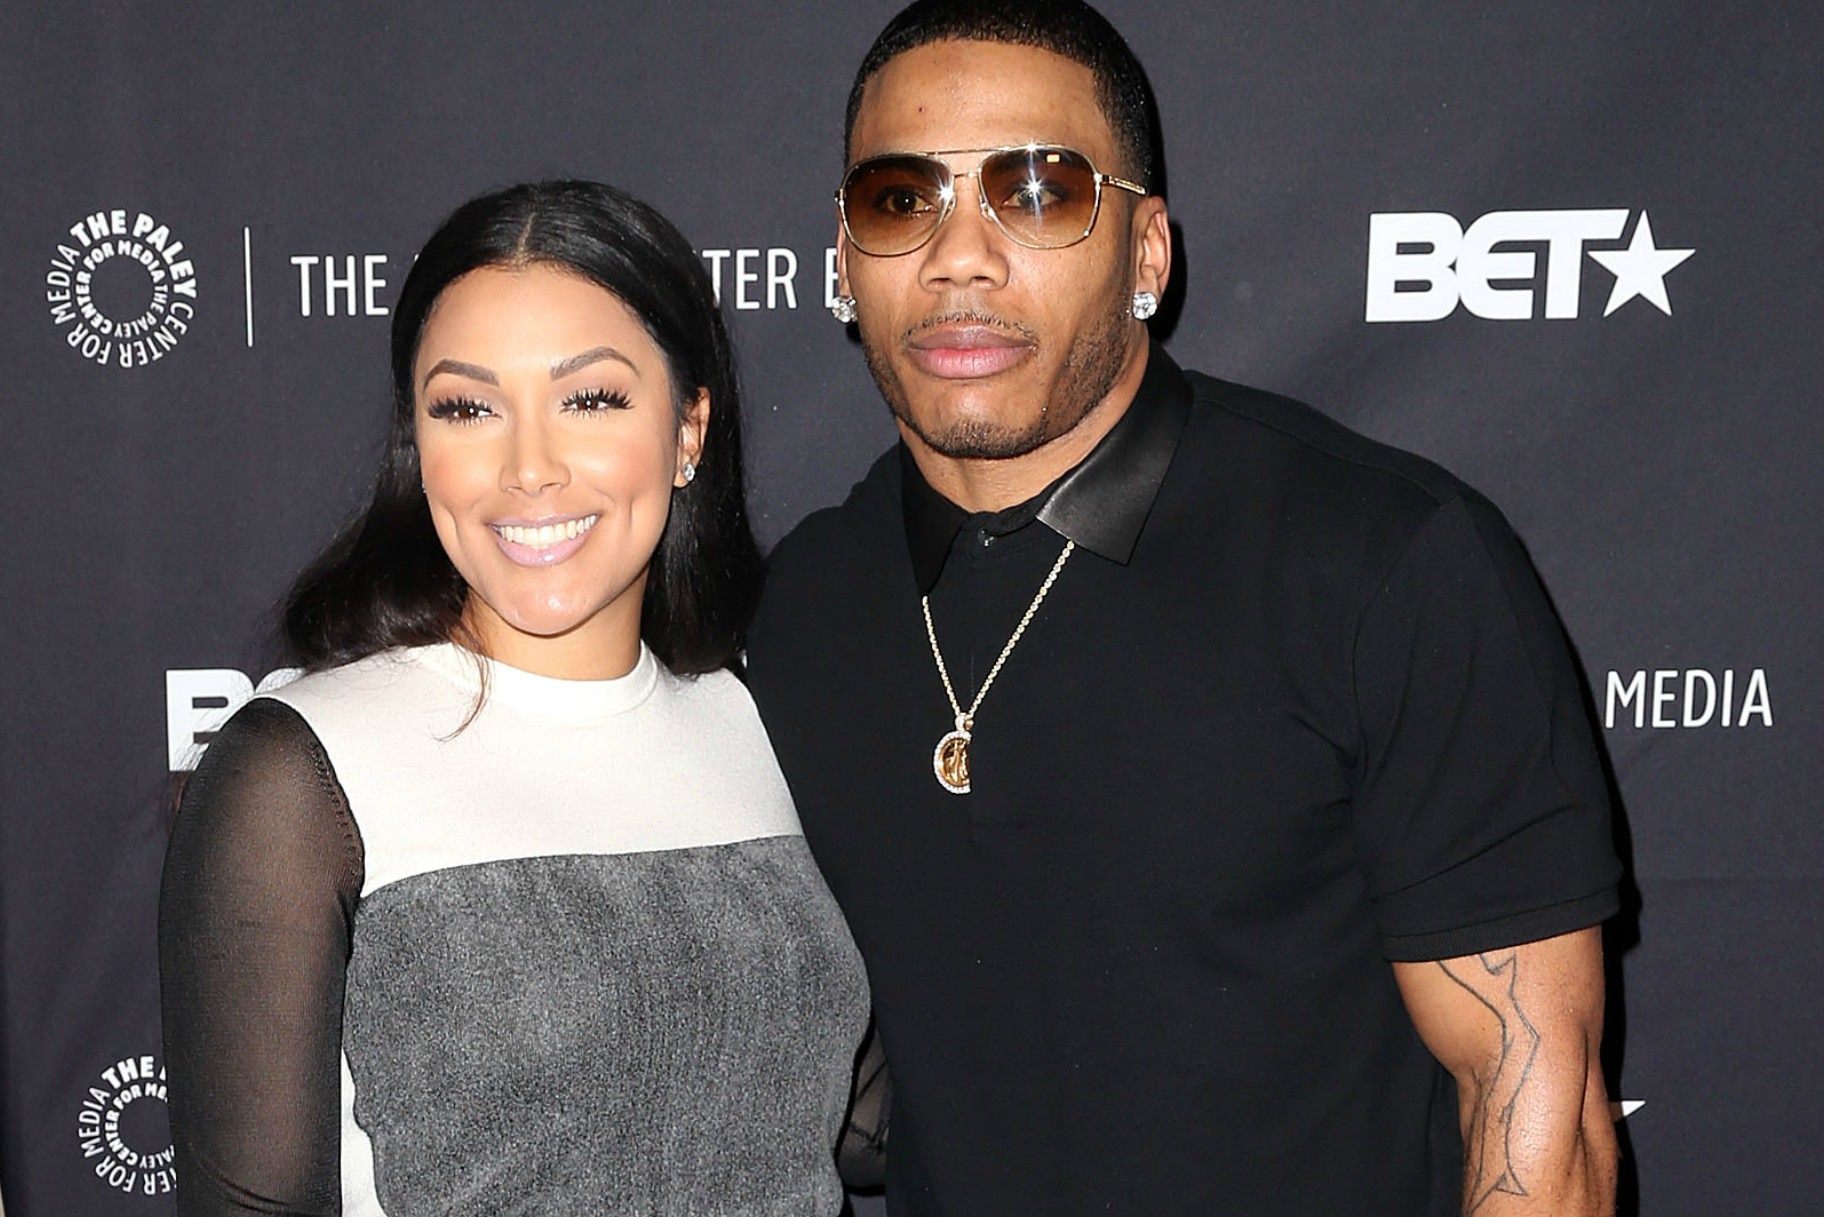 Nelly S Girlfriend Shantel Jackson Calls New Assault Allegations False Claims Says She Was